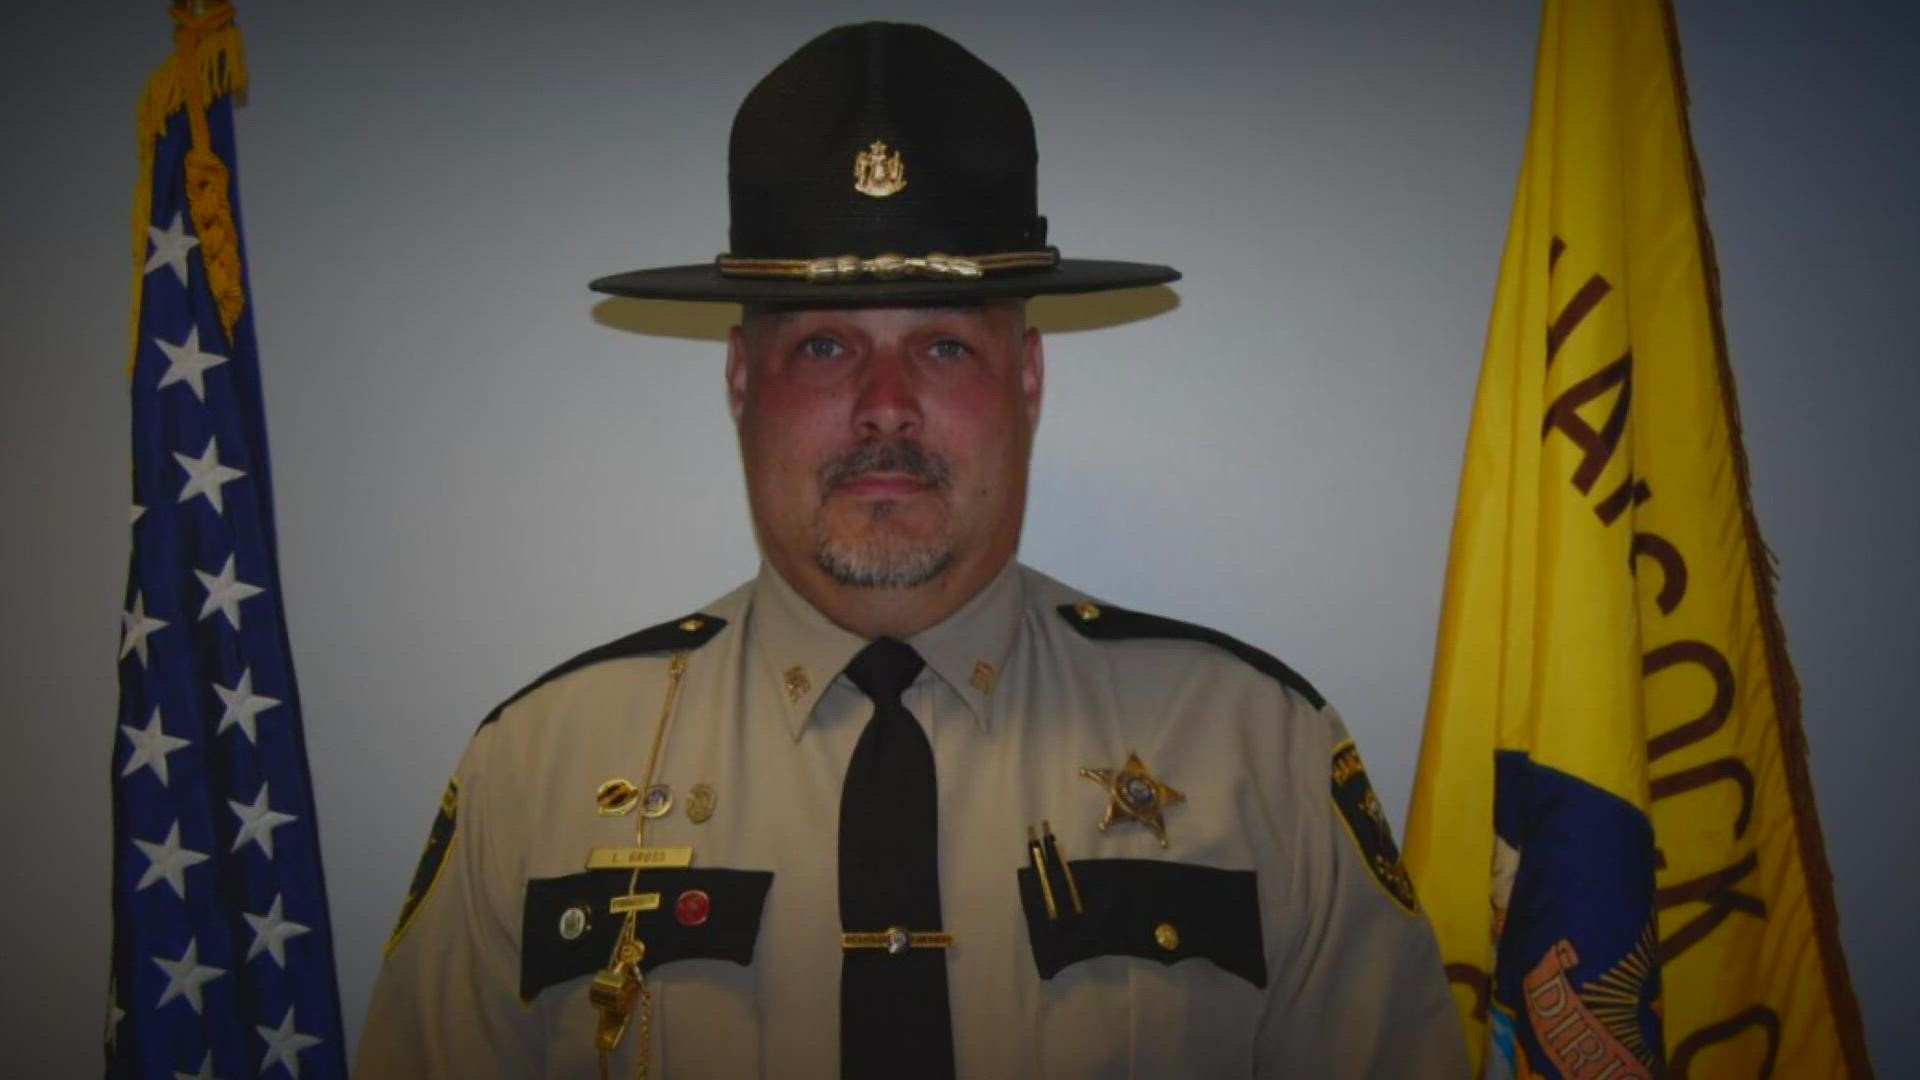 The Hancock County Sheriff's Dept. says Deputy Luke Gross was hit by a vehicle and killed while responding to a call. He leaves behind his wife and two children.